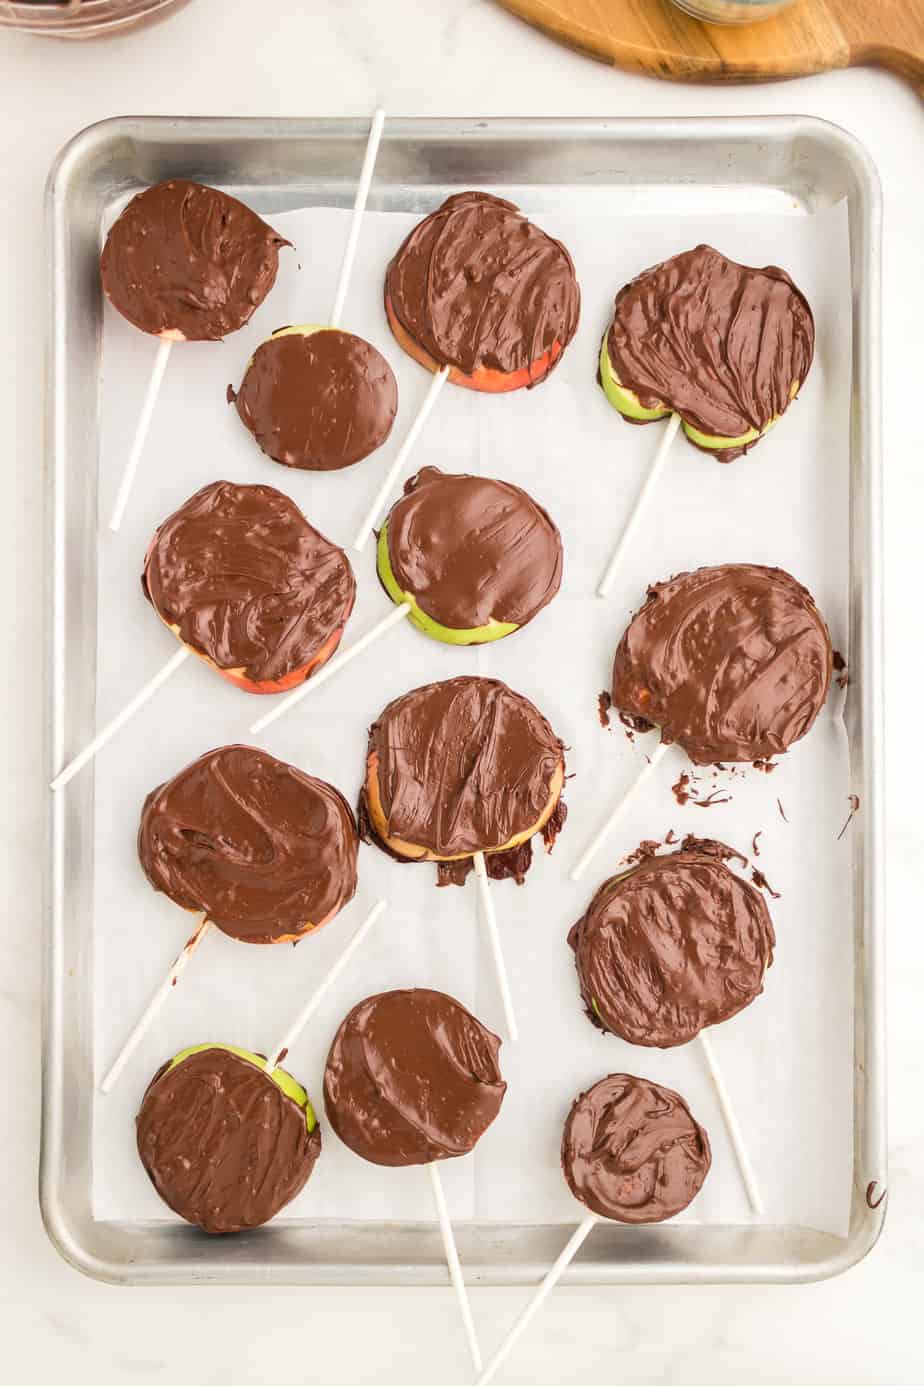 Apple slices with sticks coated in chocolate resting on parchment paper on a baking sheet from overhead.